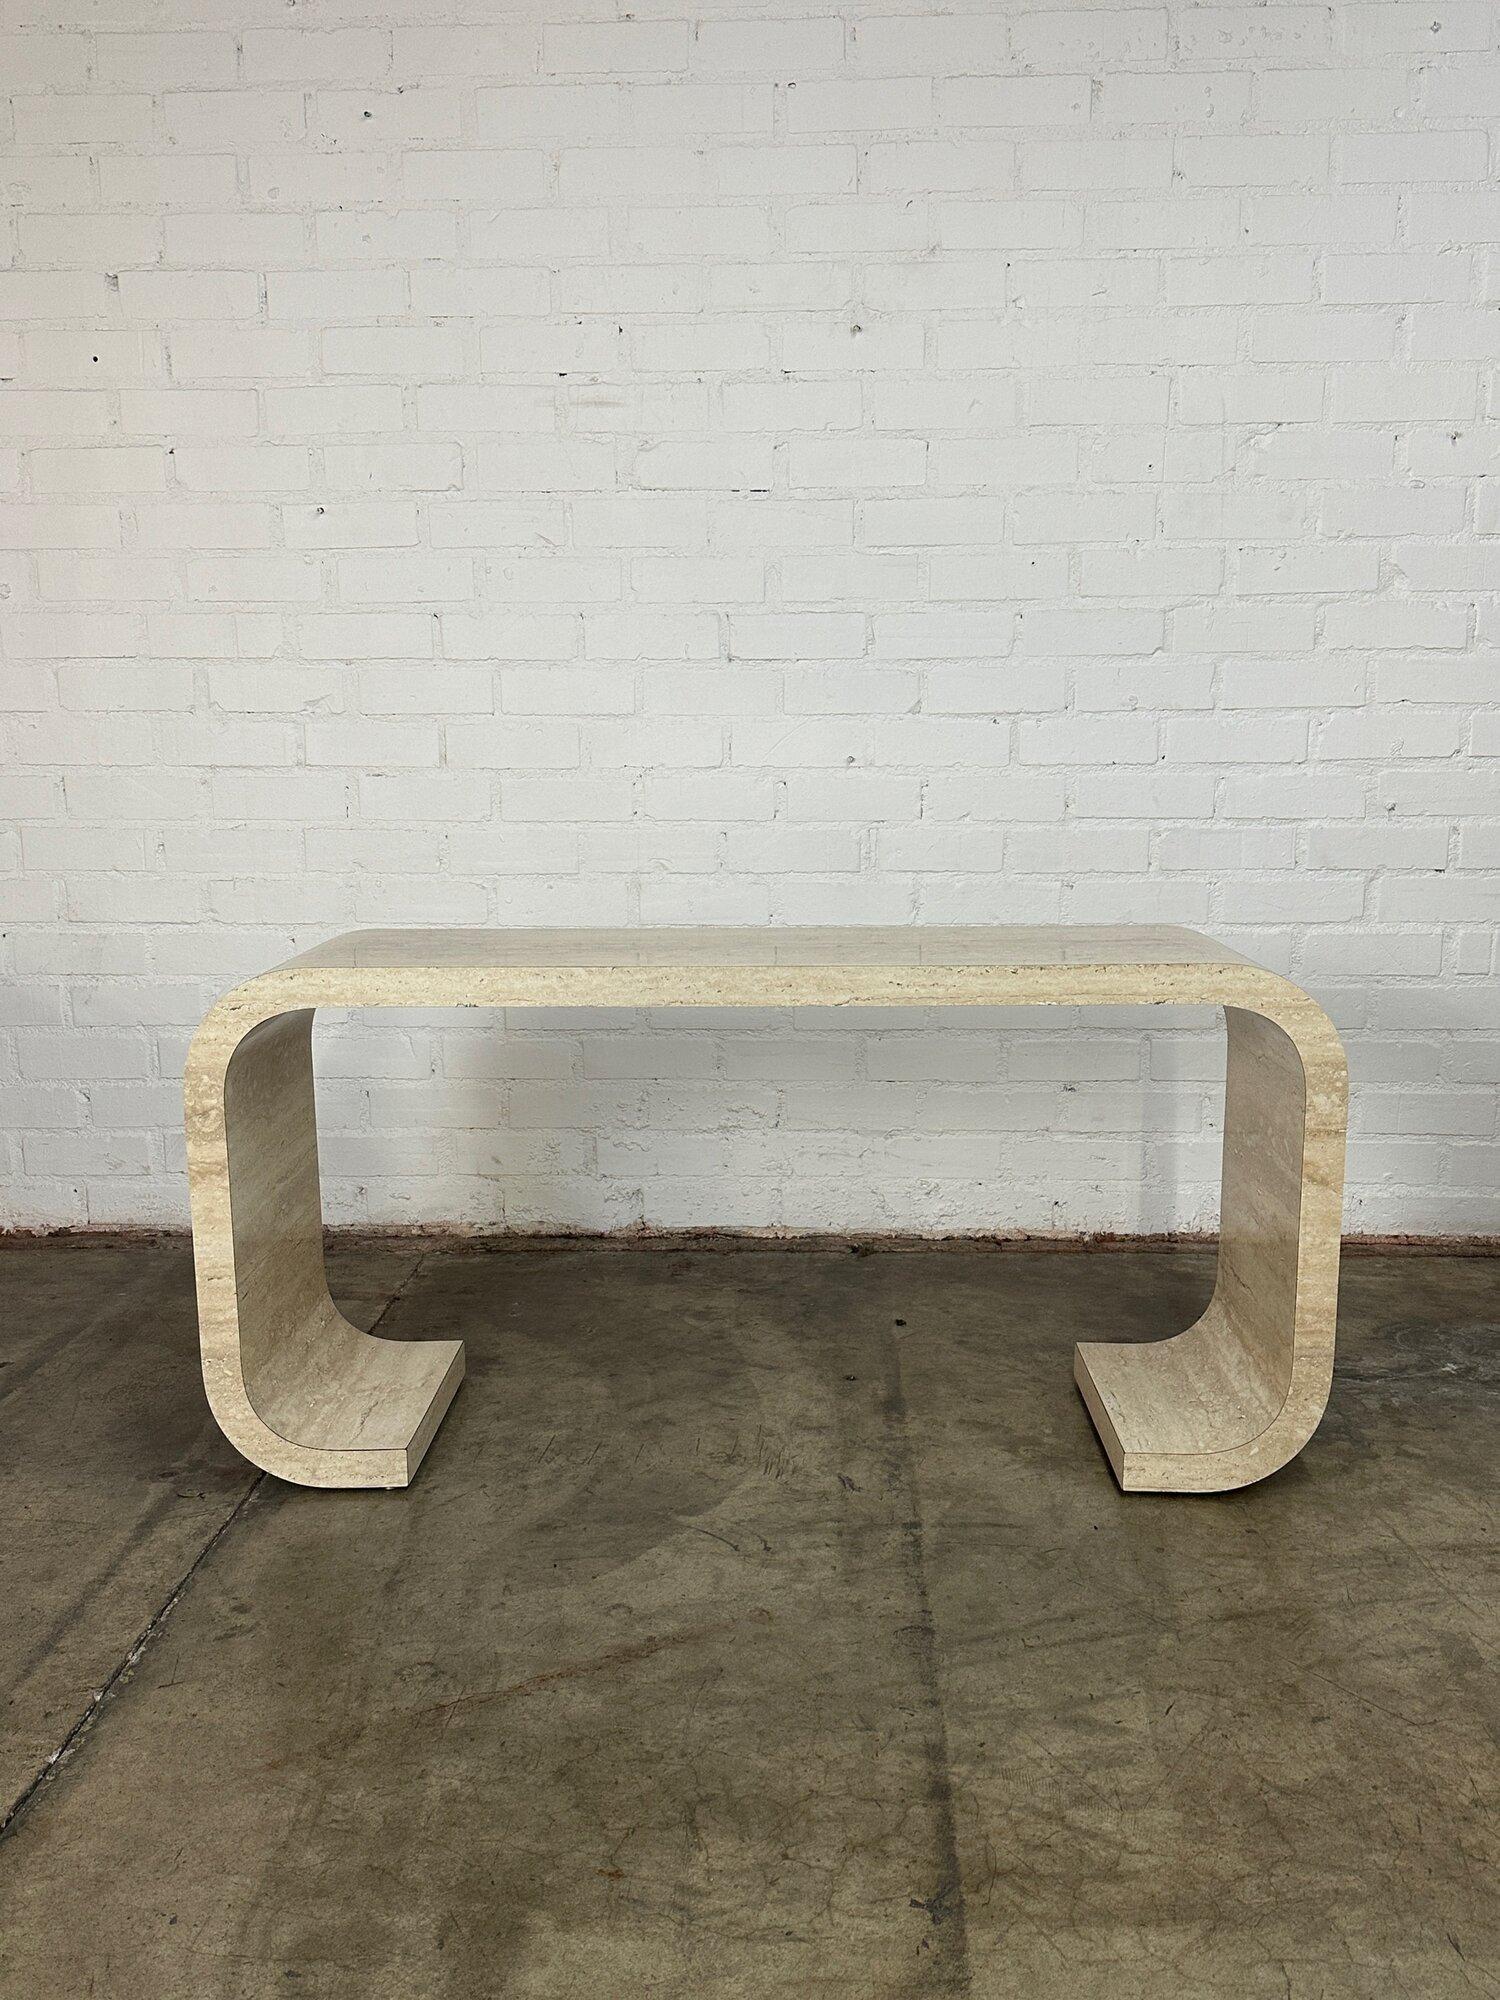 W60 D16 H29

Vintage post modern scroll console table. Item is well preserved with no major areas of wear. Console table or desk is structurally sound and sturdy. Item has travertine look and grain but it is thick laminate faux material. 